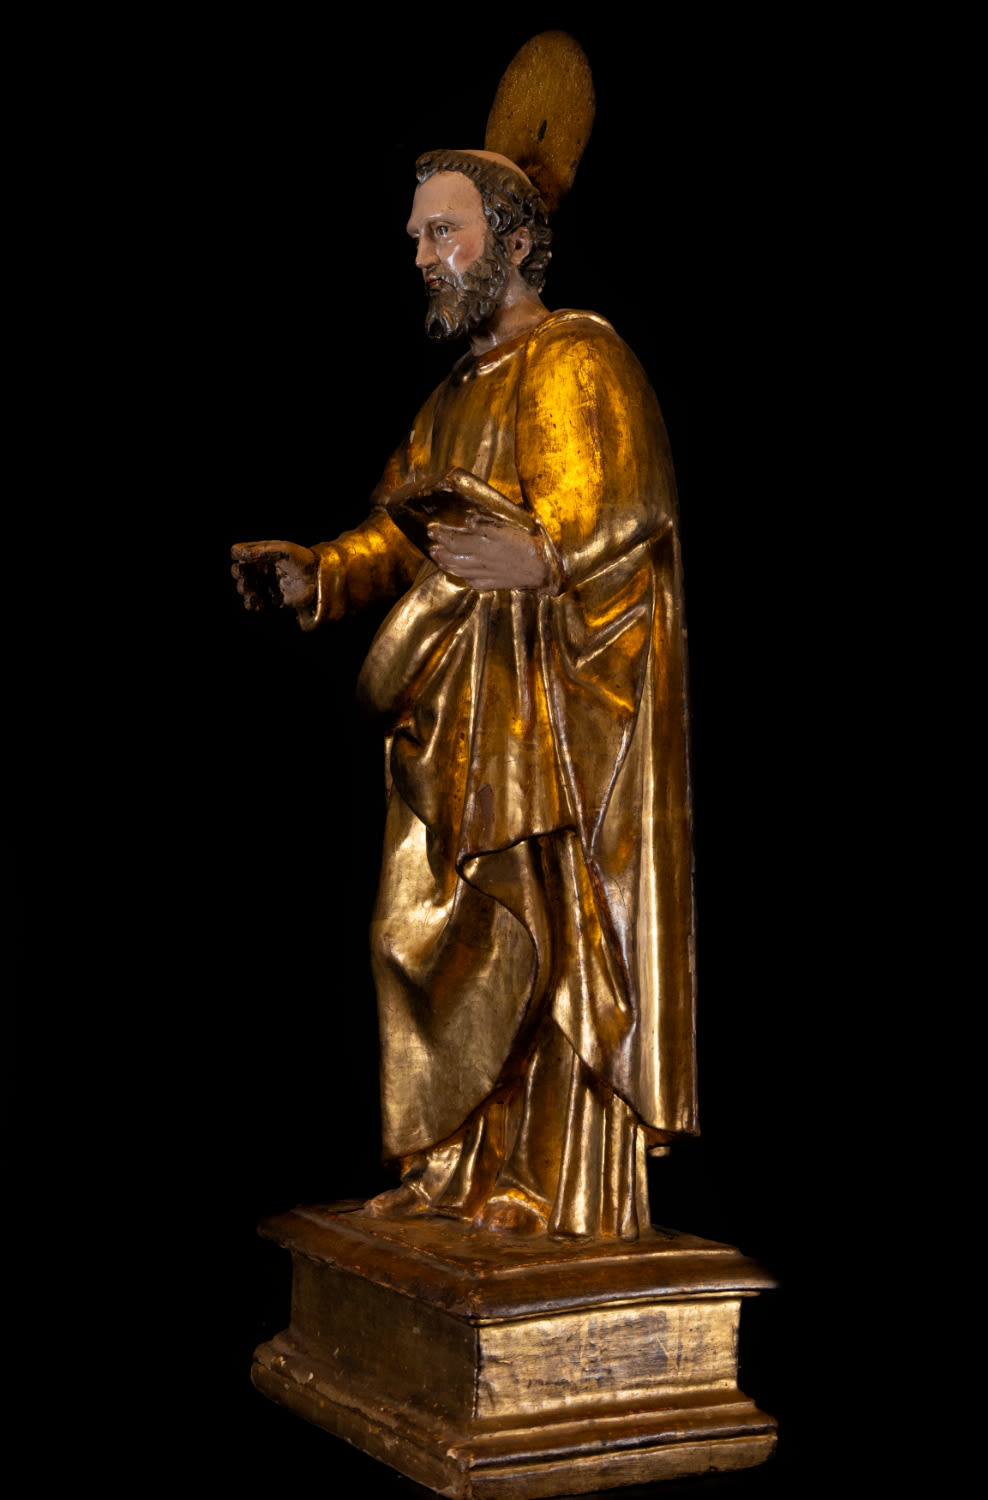 Sculpture of Saint Peter in gilded wood, Castilian school, 17th - 18th centuries - Image 3 of 4